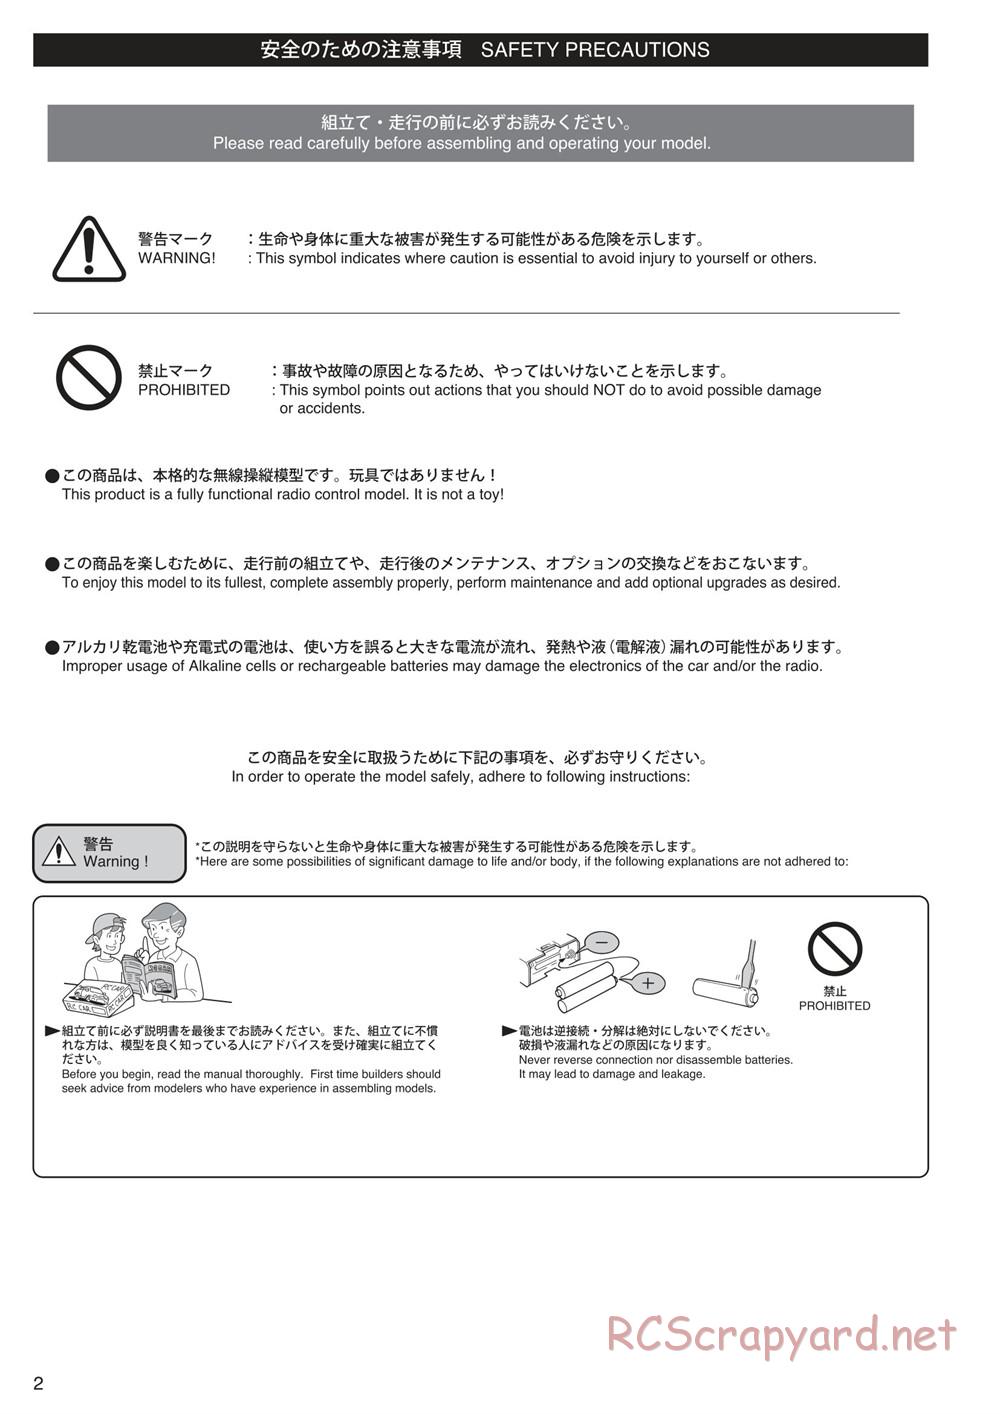 Kyosho - Ultima RB6 - Manual - Page 2